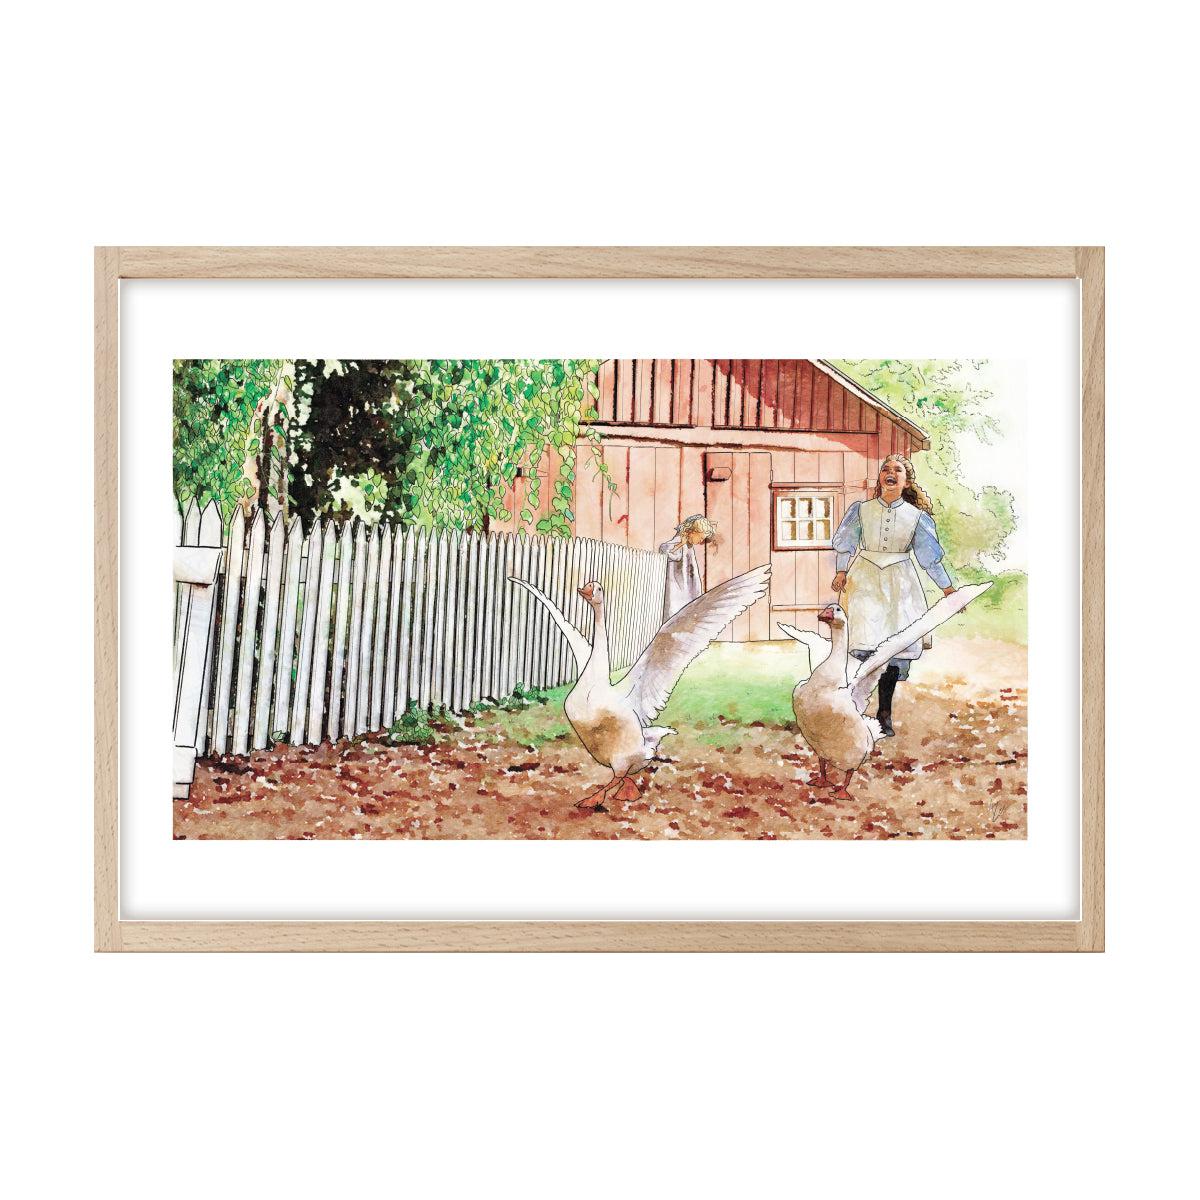 "Running With Geese" Limited Edition Illustrated Print On Watercolor Paper